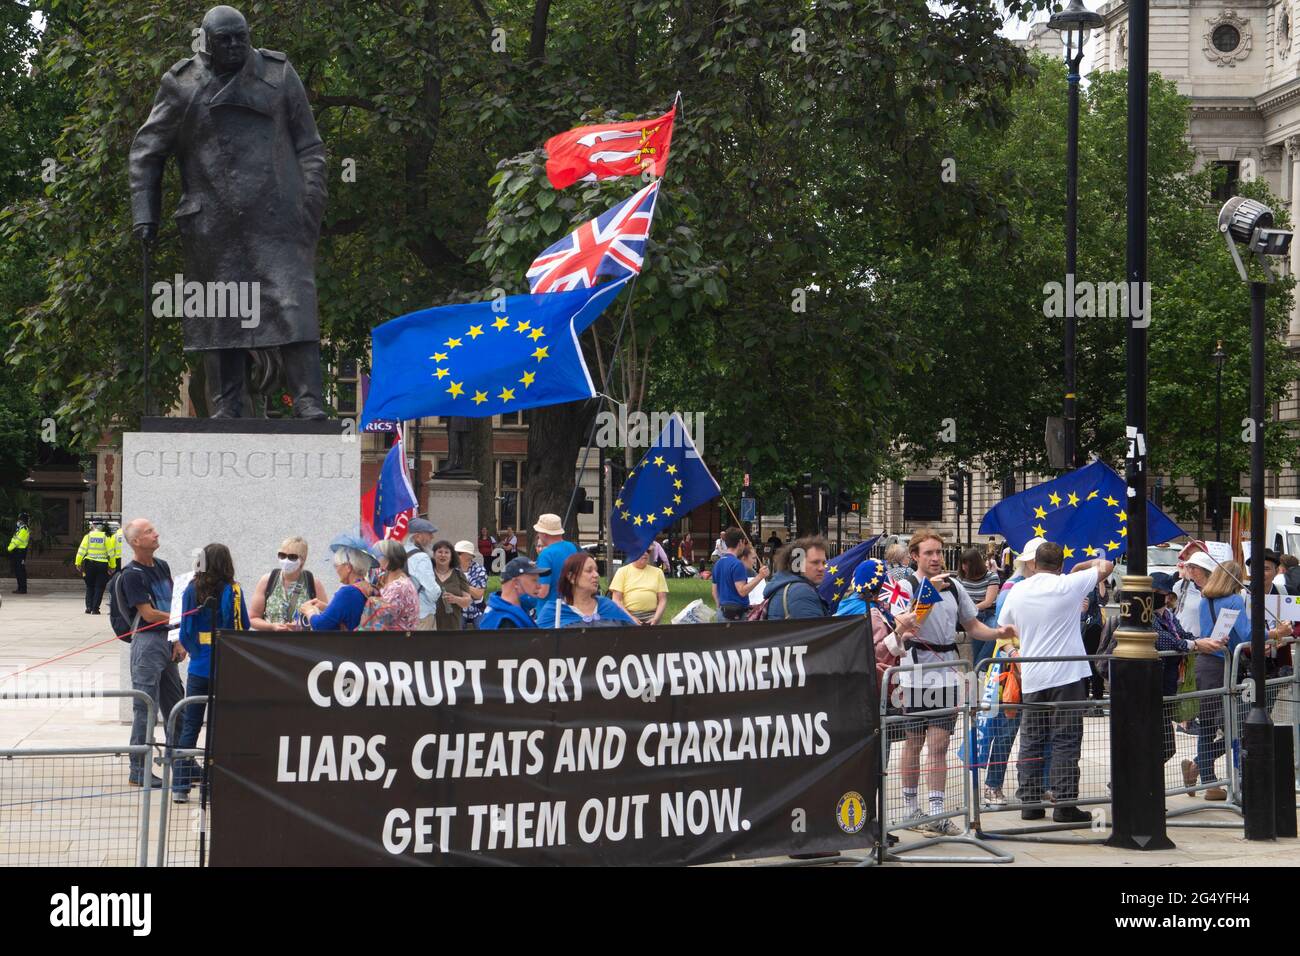 Whitehall, London, UK - 23 June 2021 - Banner along the railings at Parliament Square at the demonstration in Whitehall, London organised by SODEM  to Stock Photo